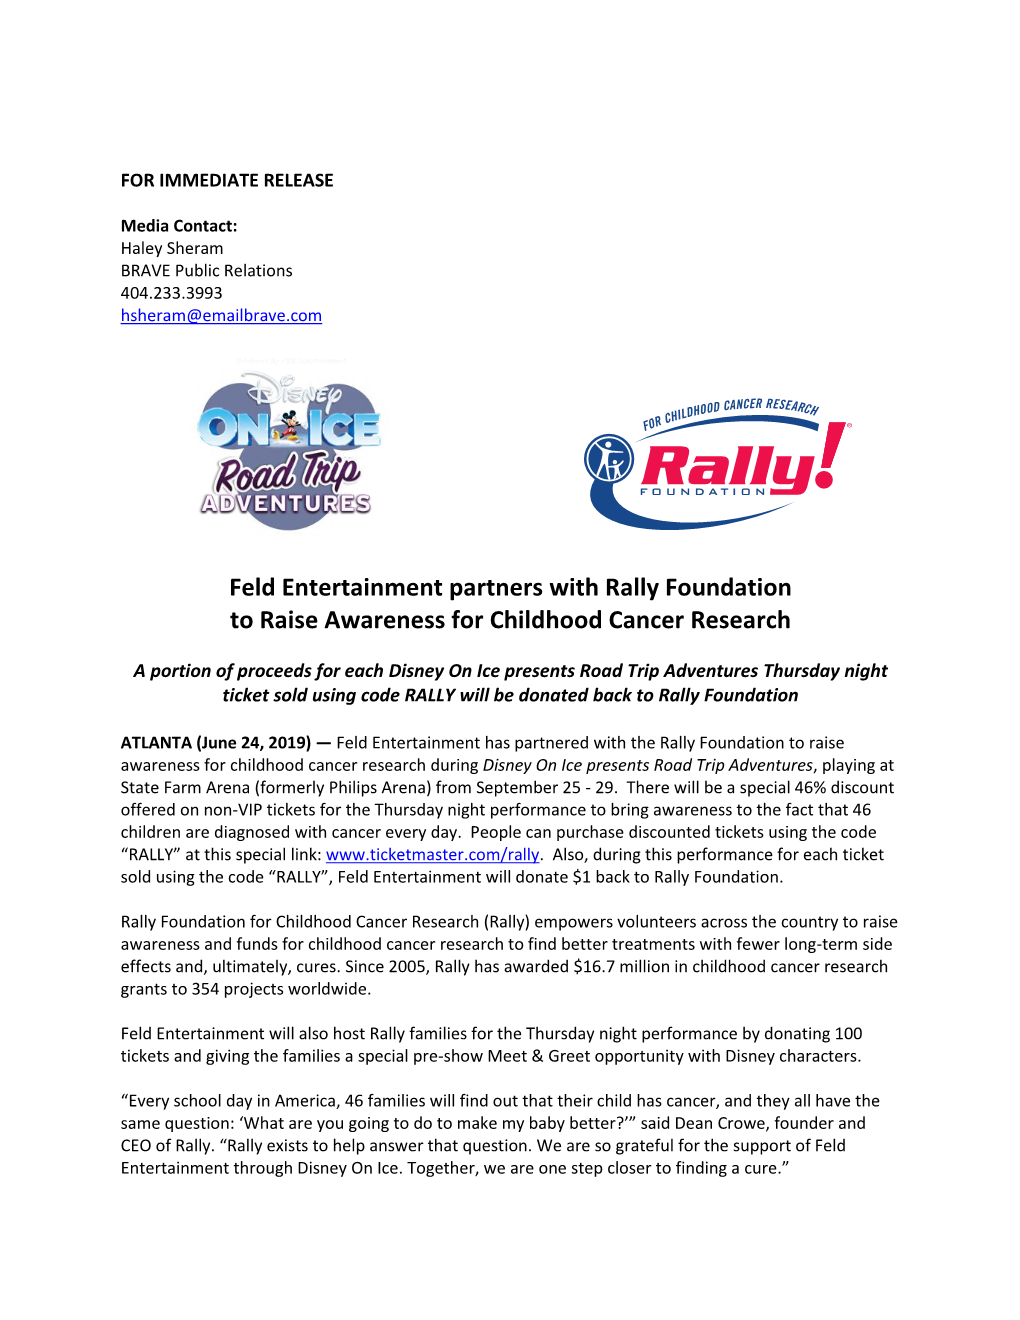 Feld Entertainment Partners with Rally Foundation to Raise Awareness for Childhood Cancer Research